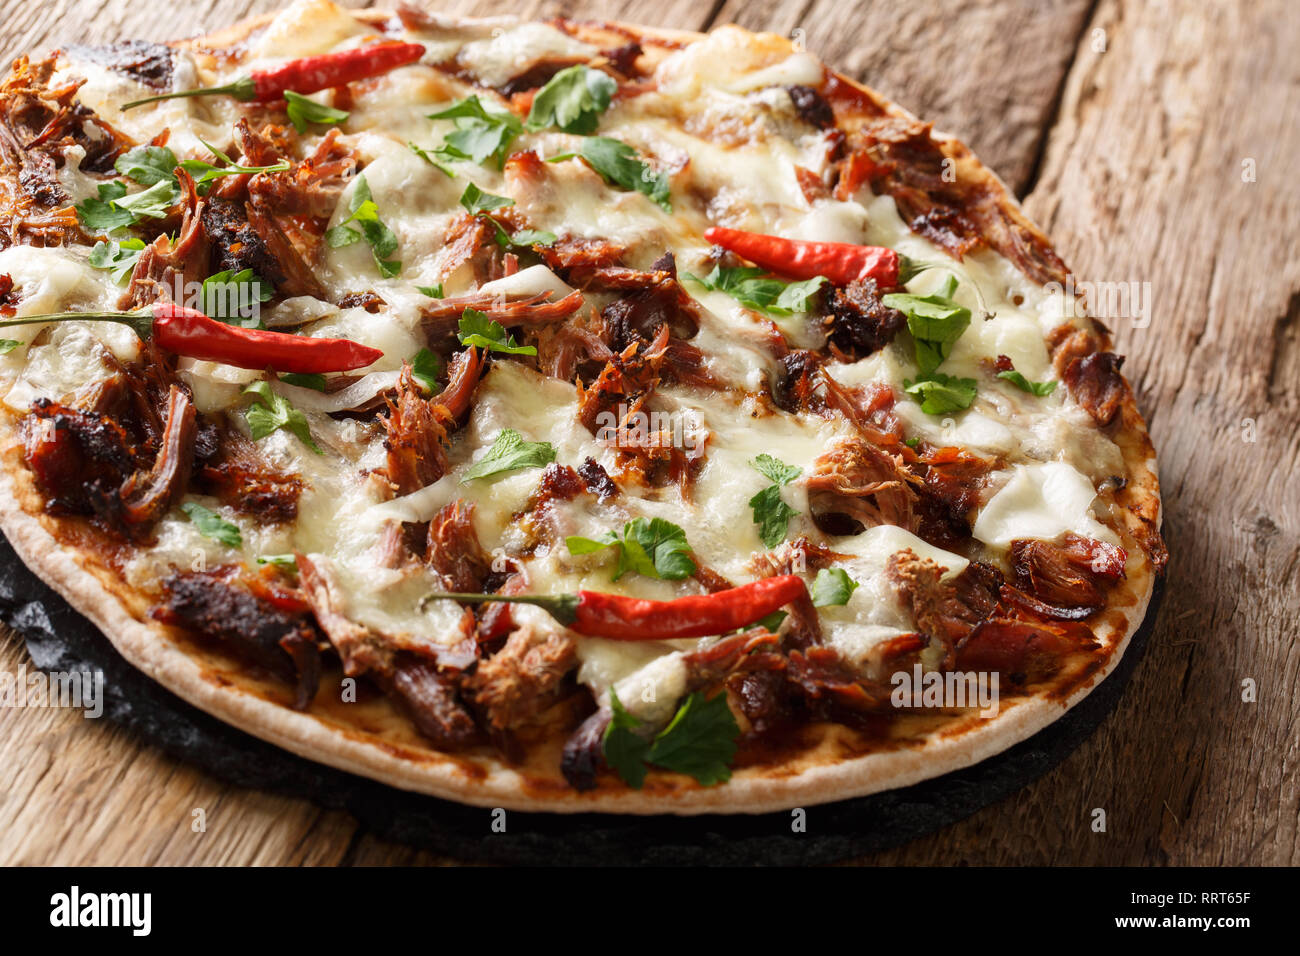 Homemade pizza with pulled pork, cheese, pepper and barbecue sauce close-up on the table. horizontal, rustic style Stock Photo